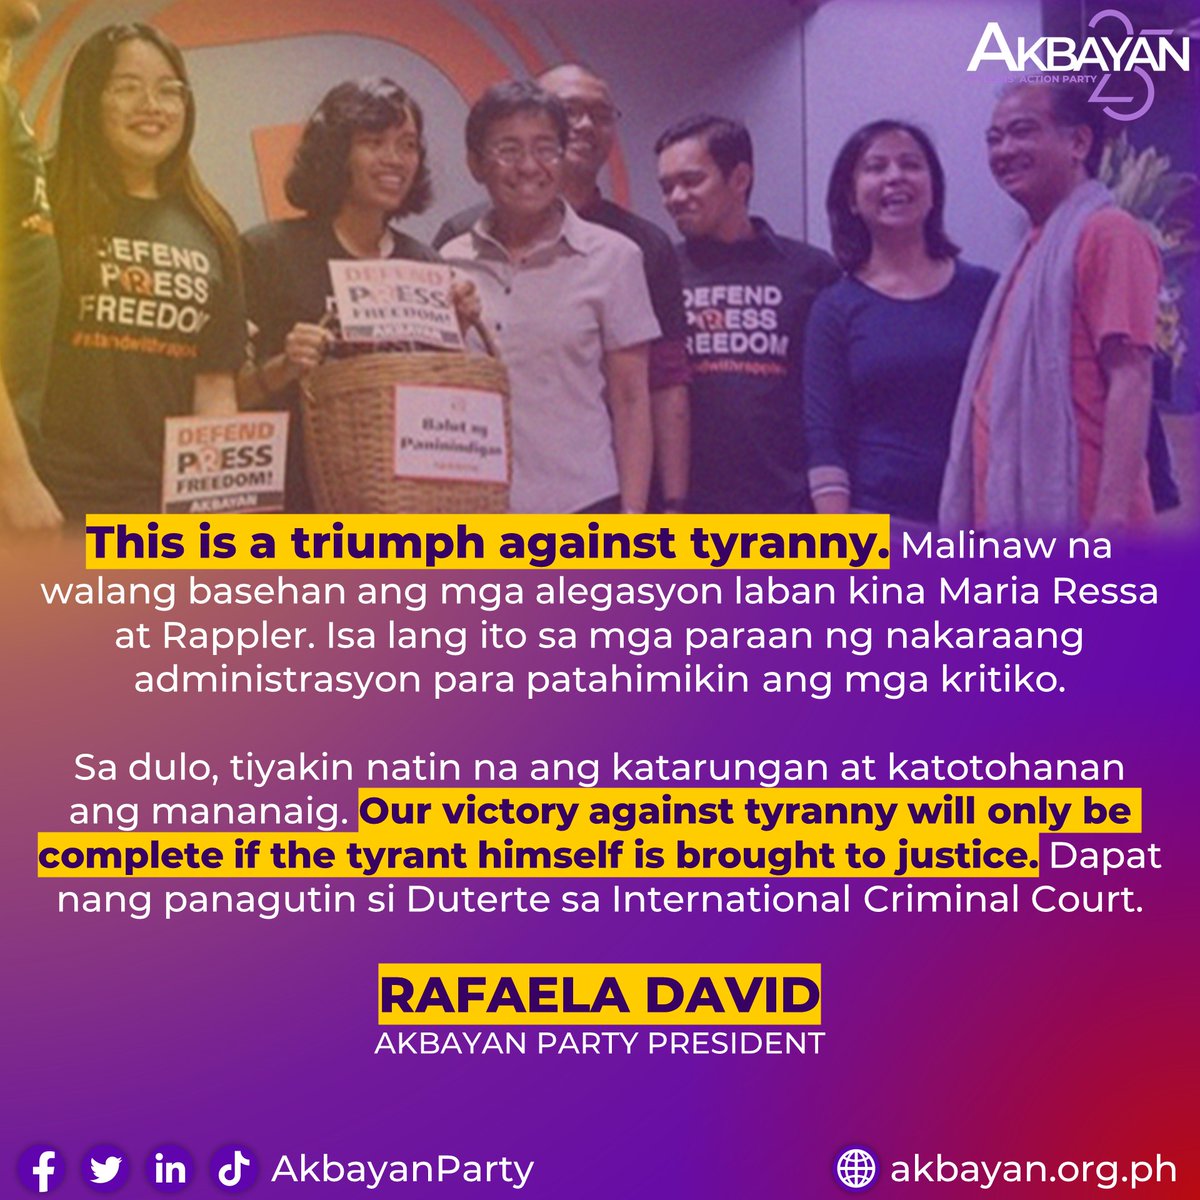 'This is a triumph against tyranny.' — AKBAYAN PARTY on @mariaressa and @rapplerdotcom's acquittal of the fifth and final tax evasion charge filed by the administration of former President Rodrigo Duterte READ MORE: facebook.com/AkbayanParty/p…